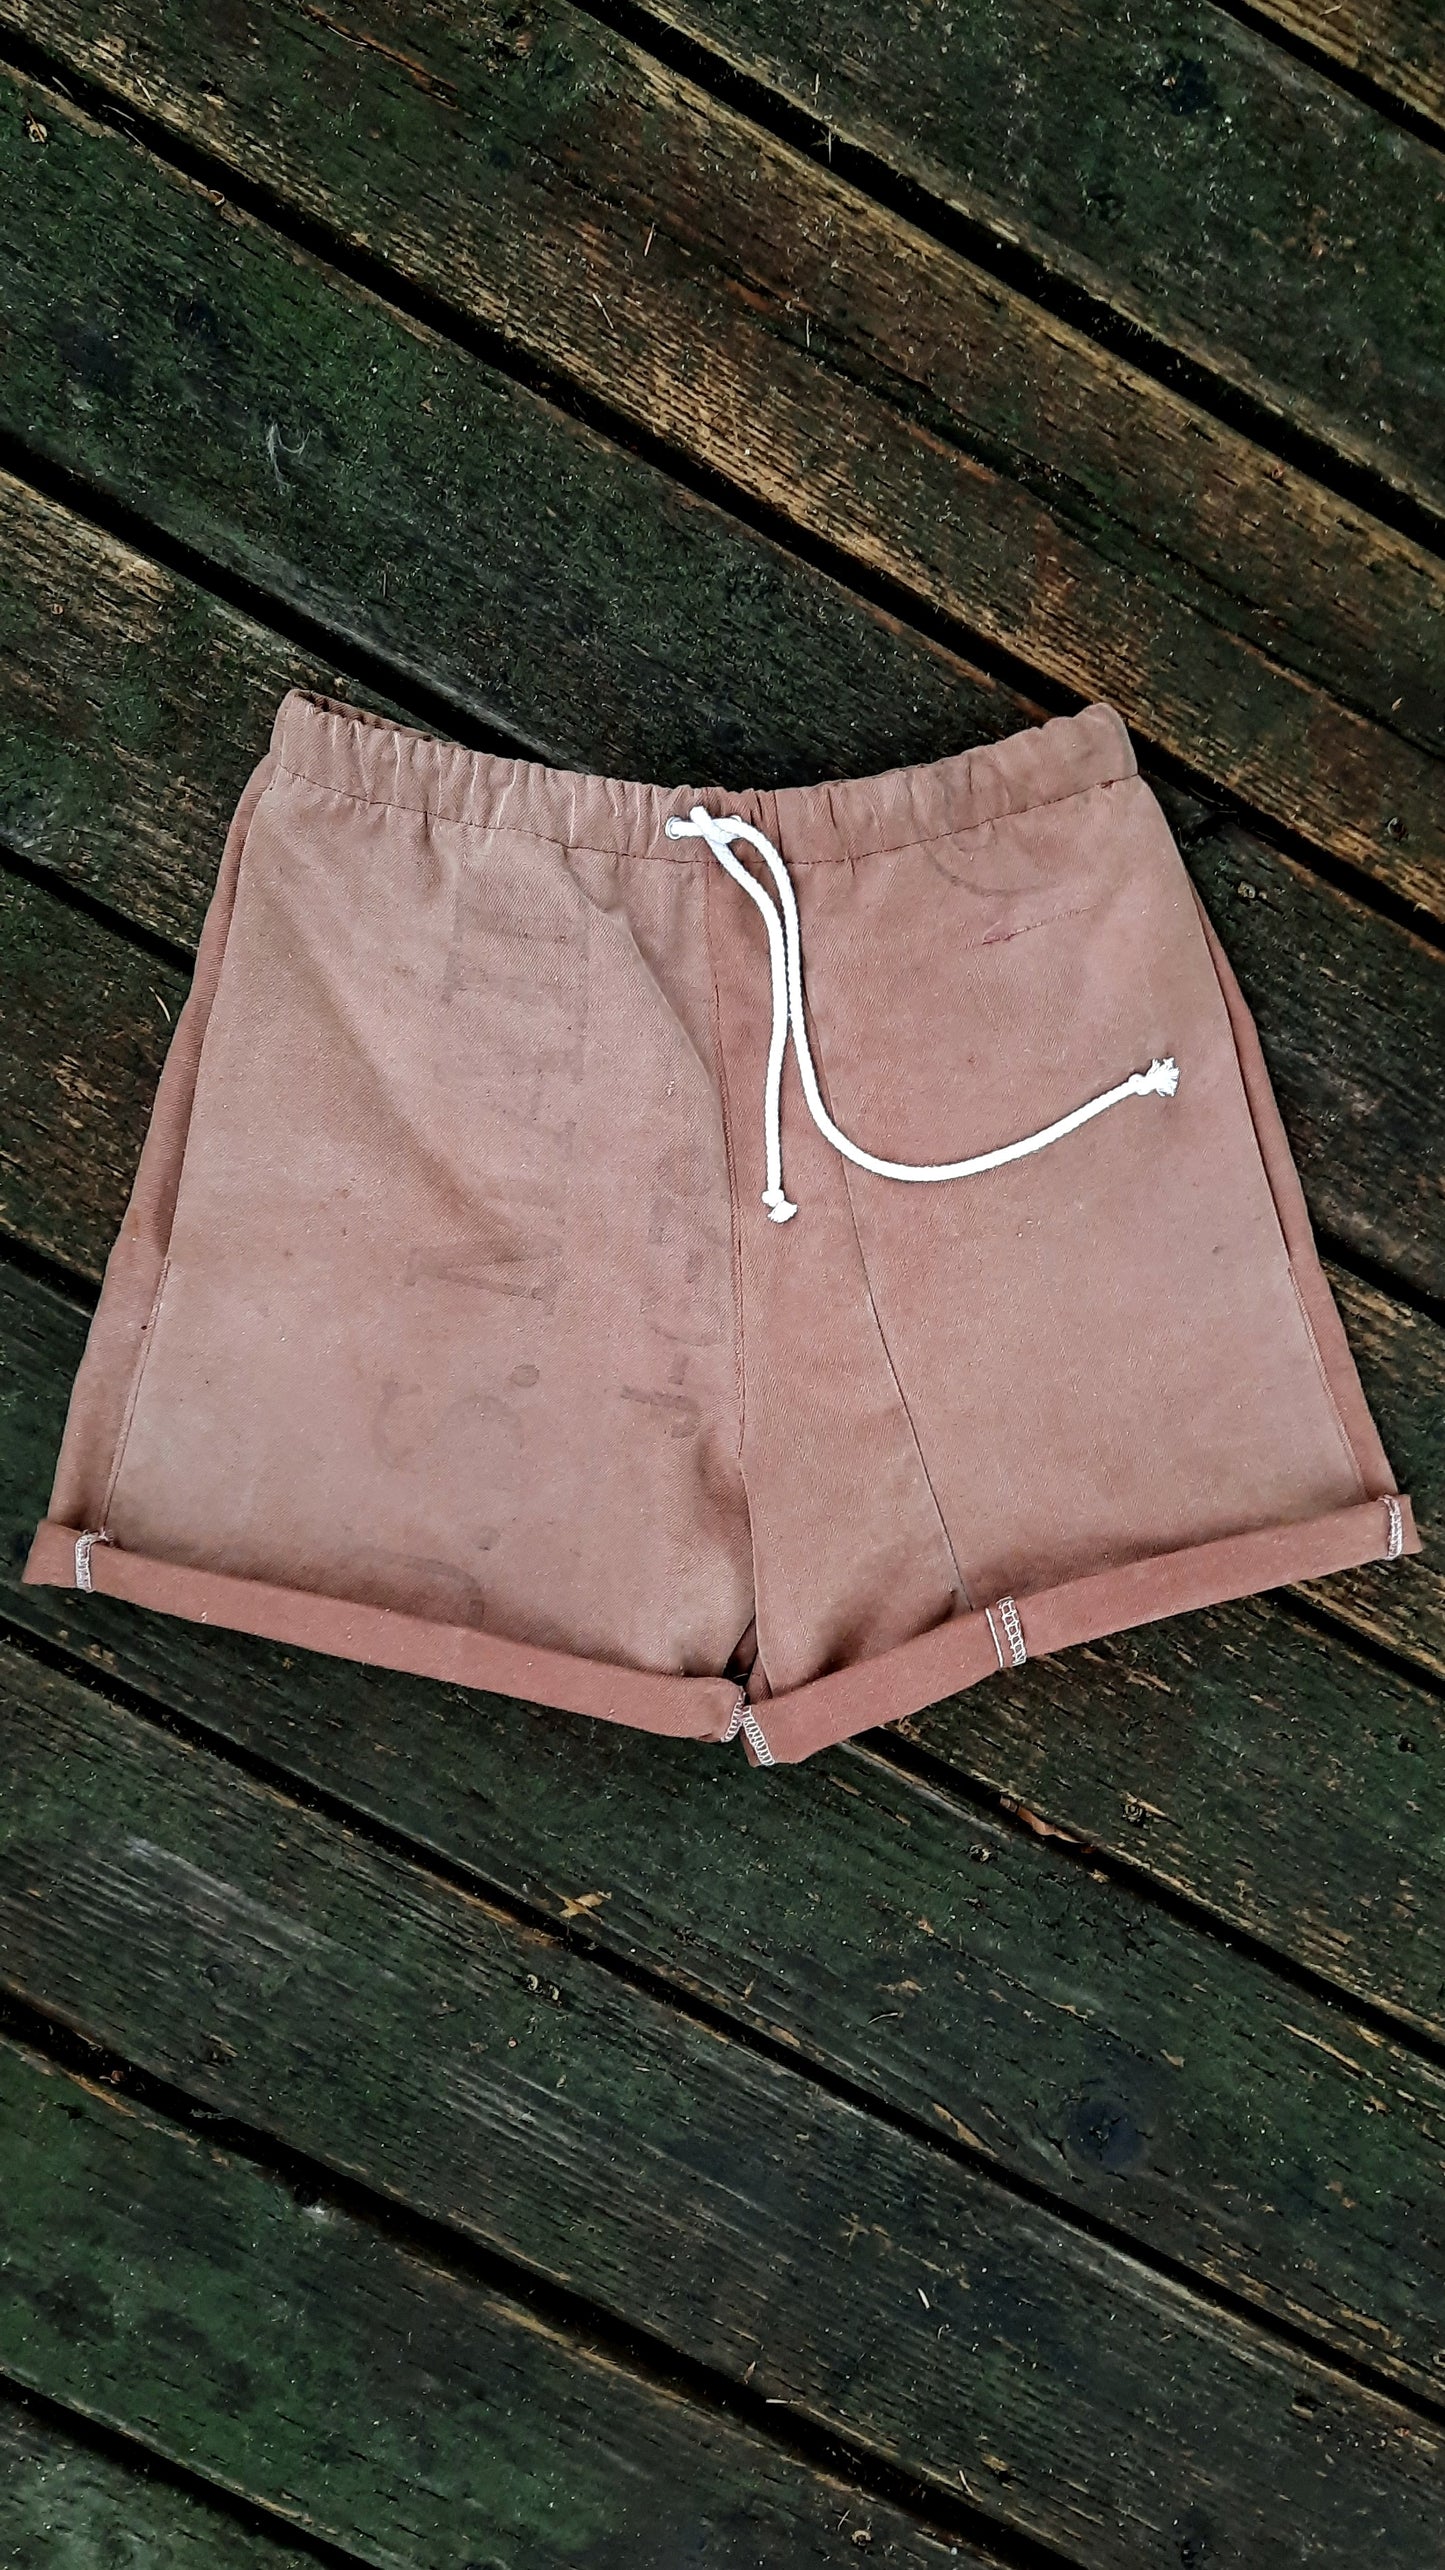 brown elastic waist cuffed shorts with rear pocket with metal details